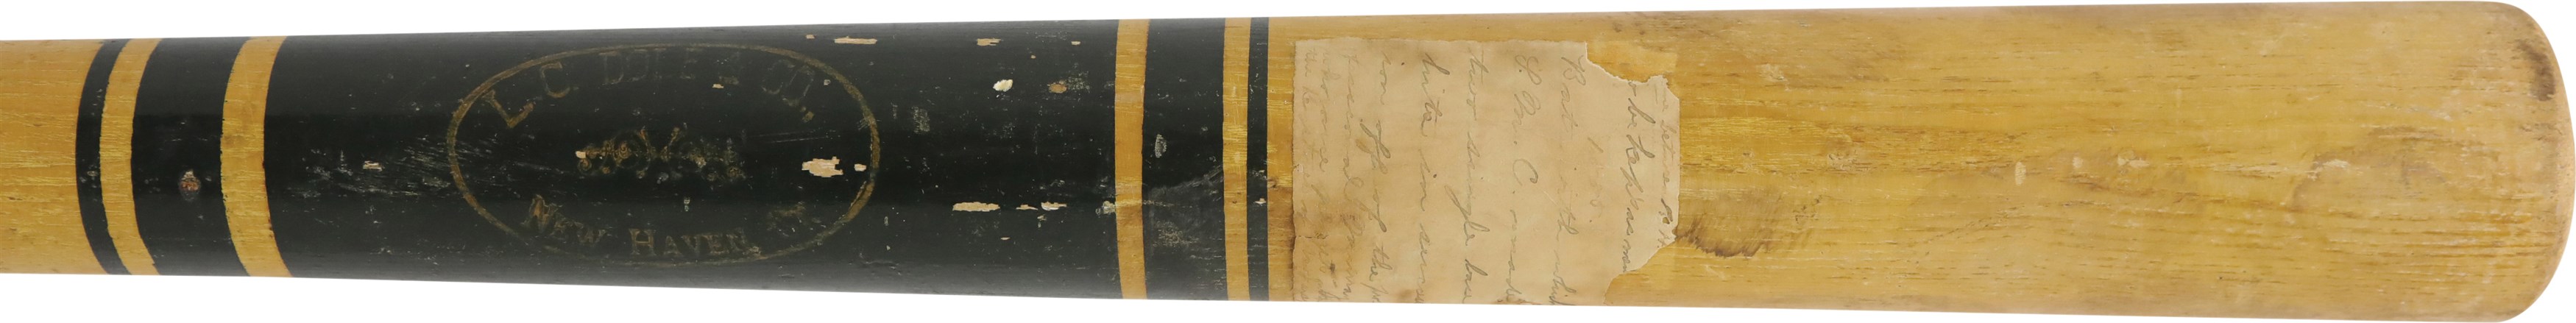 - 1880s L.C. Dole & Co. Bat Used by Samuel M. Chase